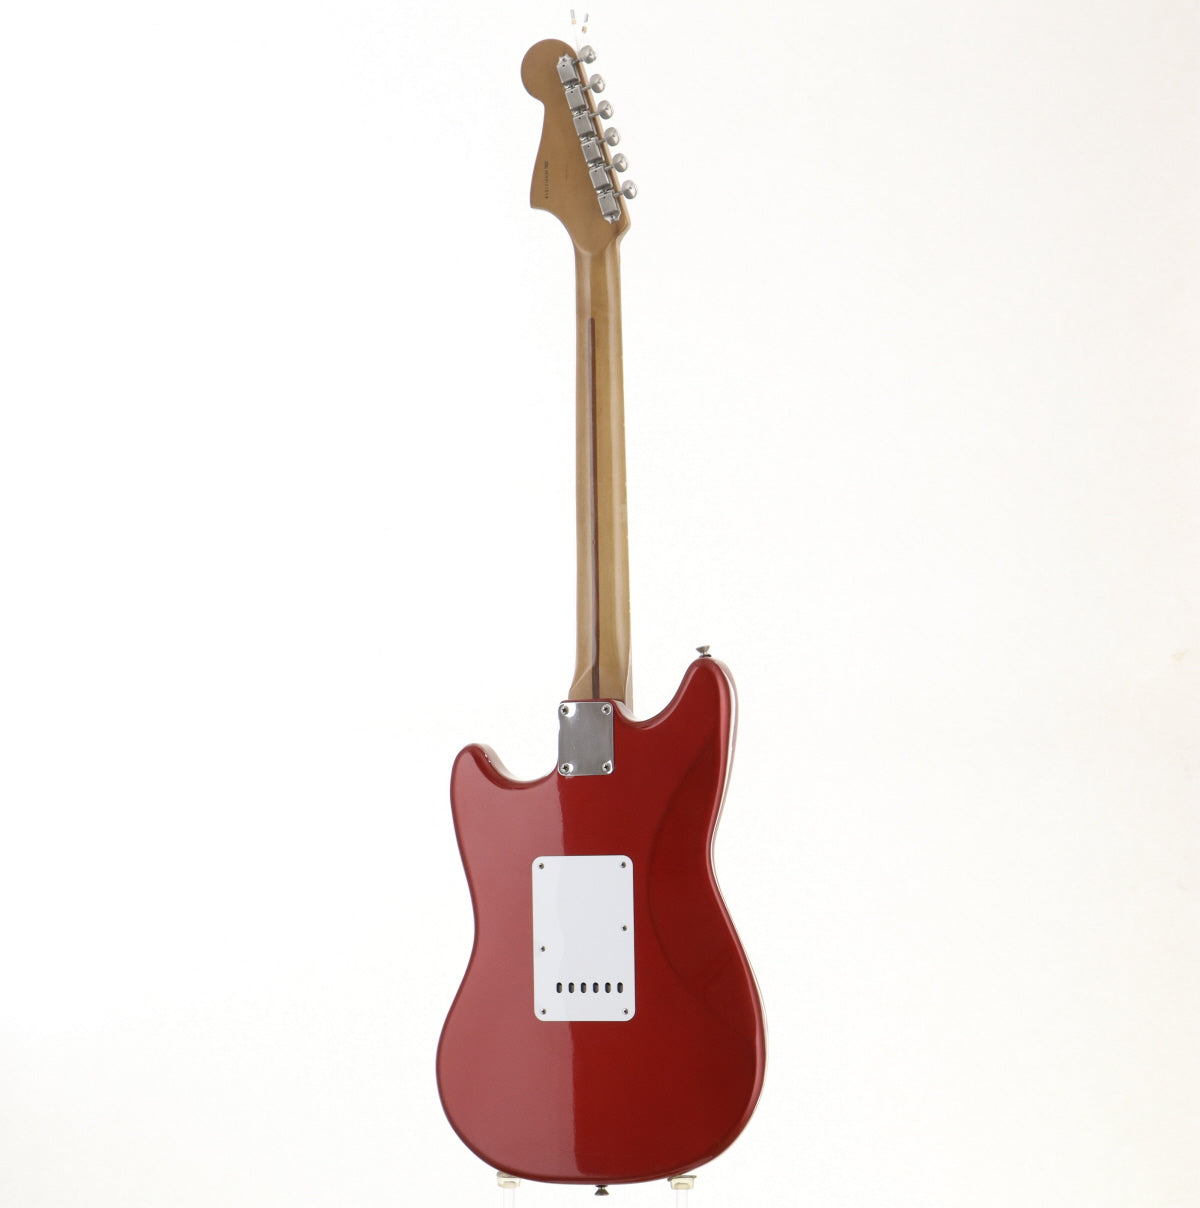 [SN MN8121519] USED FENDER MEXICO / CYCLONE CAR [03]